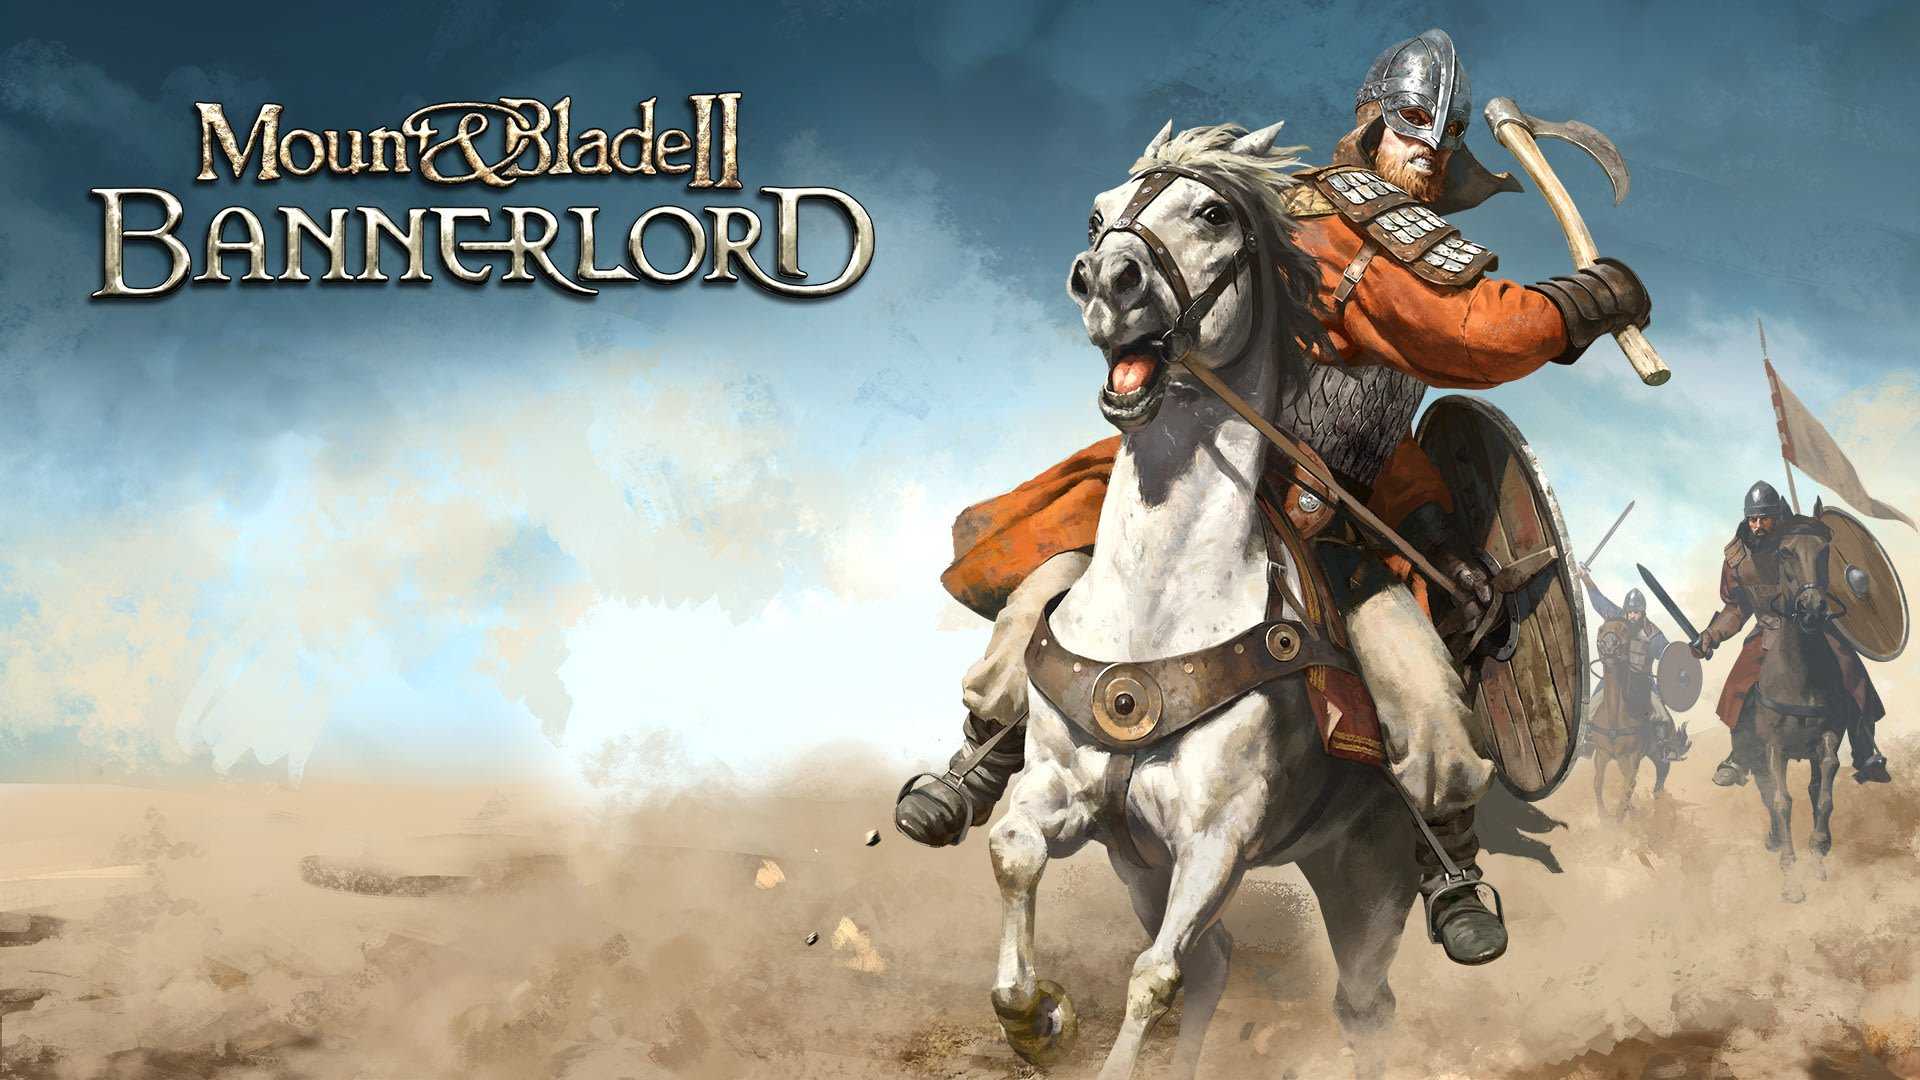 Mount and blade 2 bannerlord cannot load taleworlds mount and blade launcher steam dll